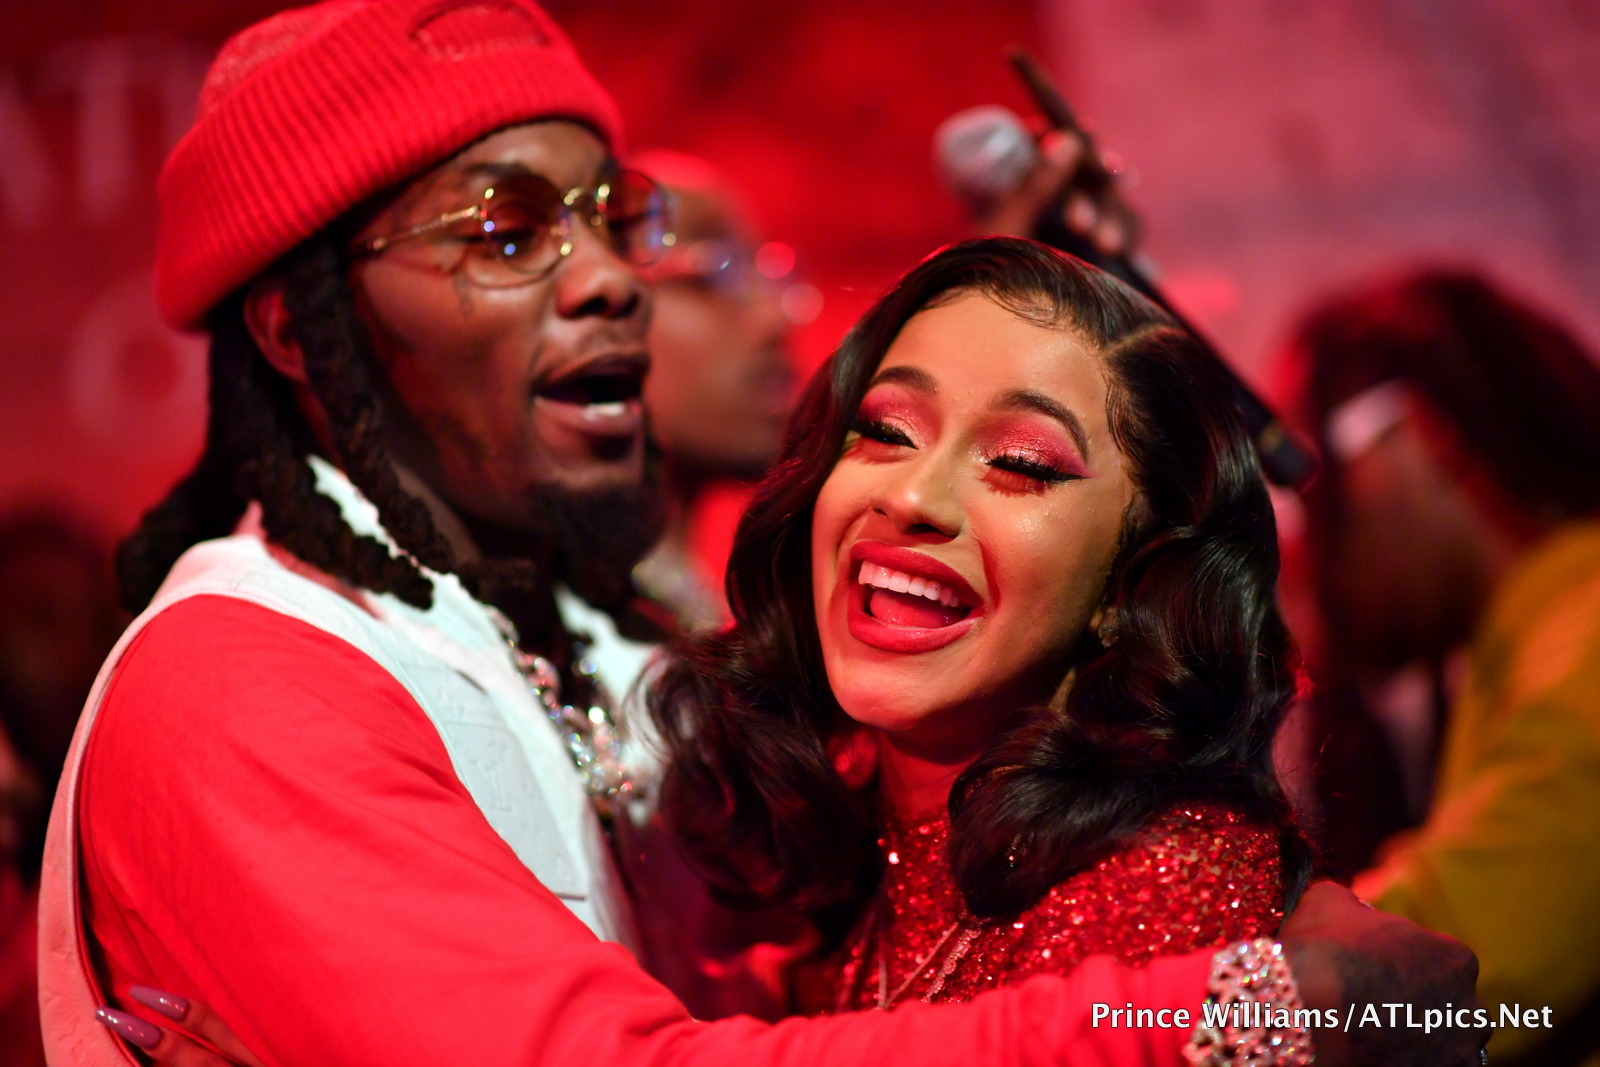 Cardi B & Offset’s Georgia Home Was Swatted Last Summer #CardiB